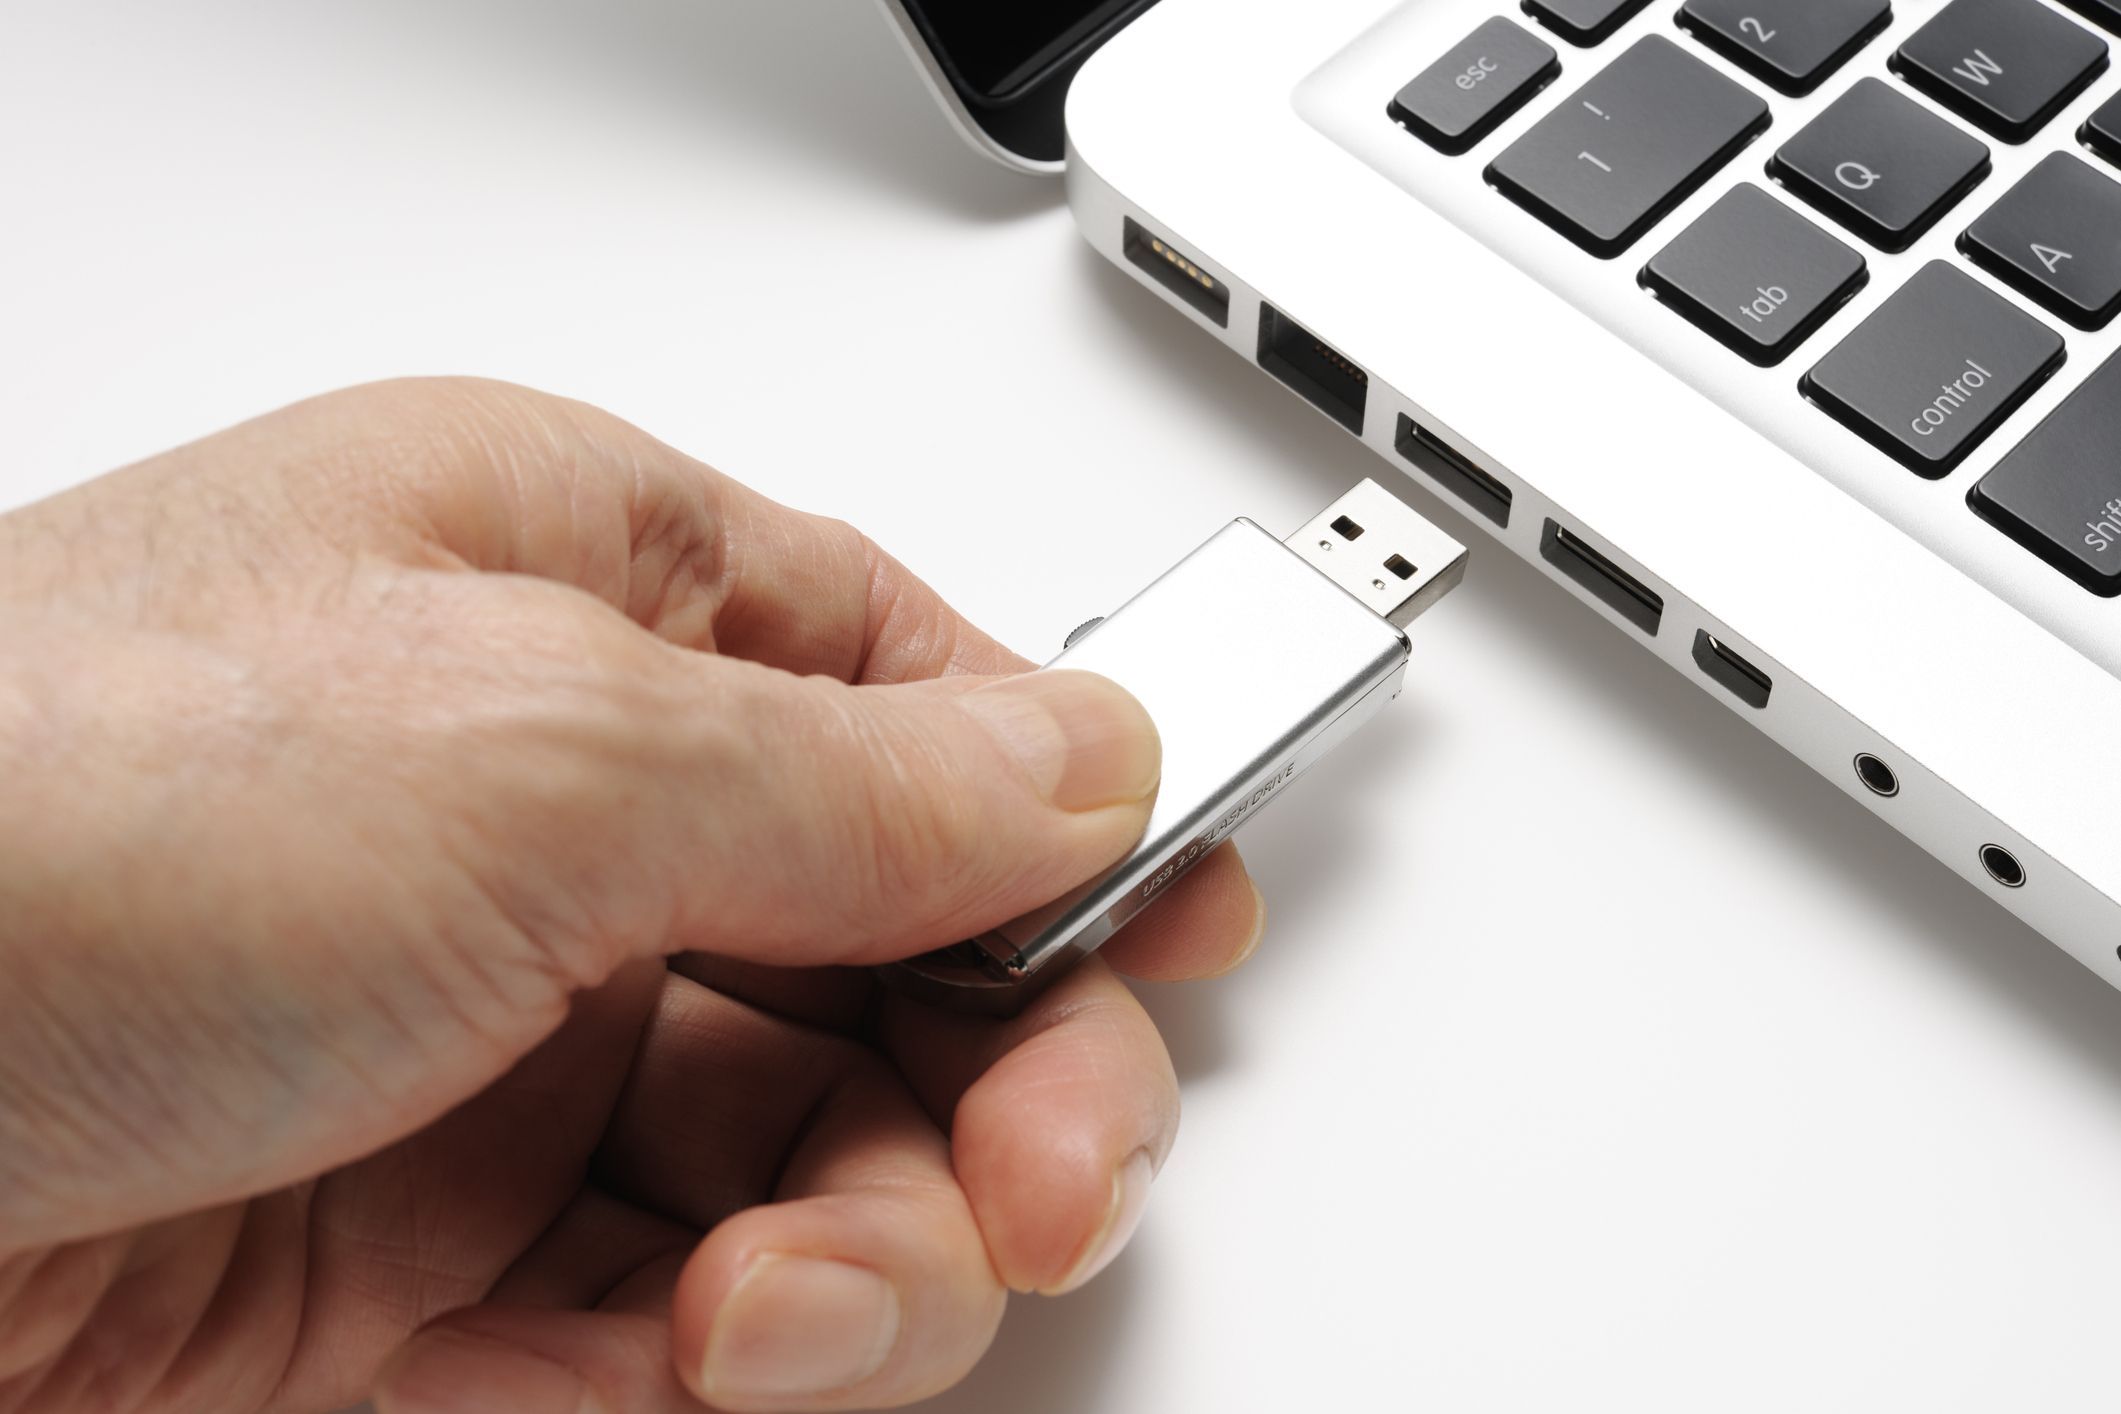 Usb drivers for mac os x